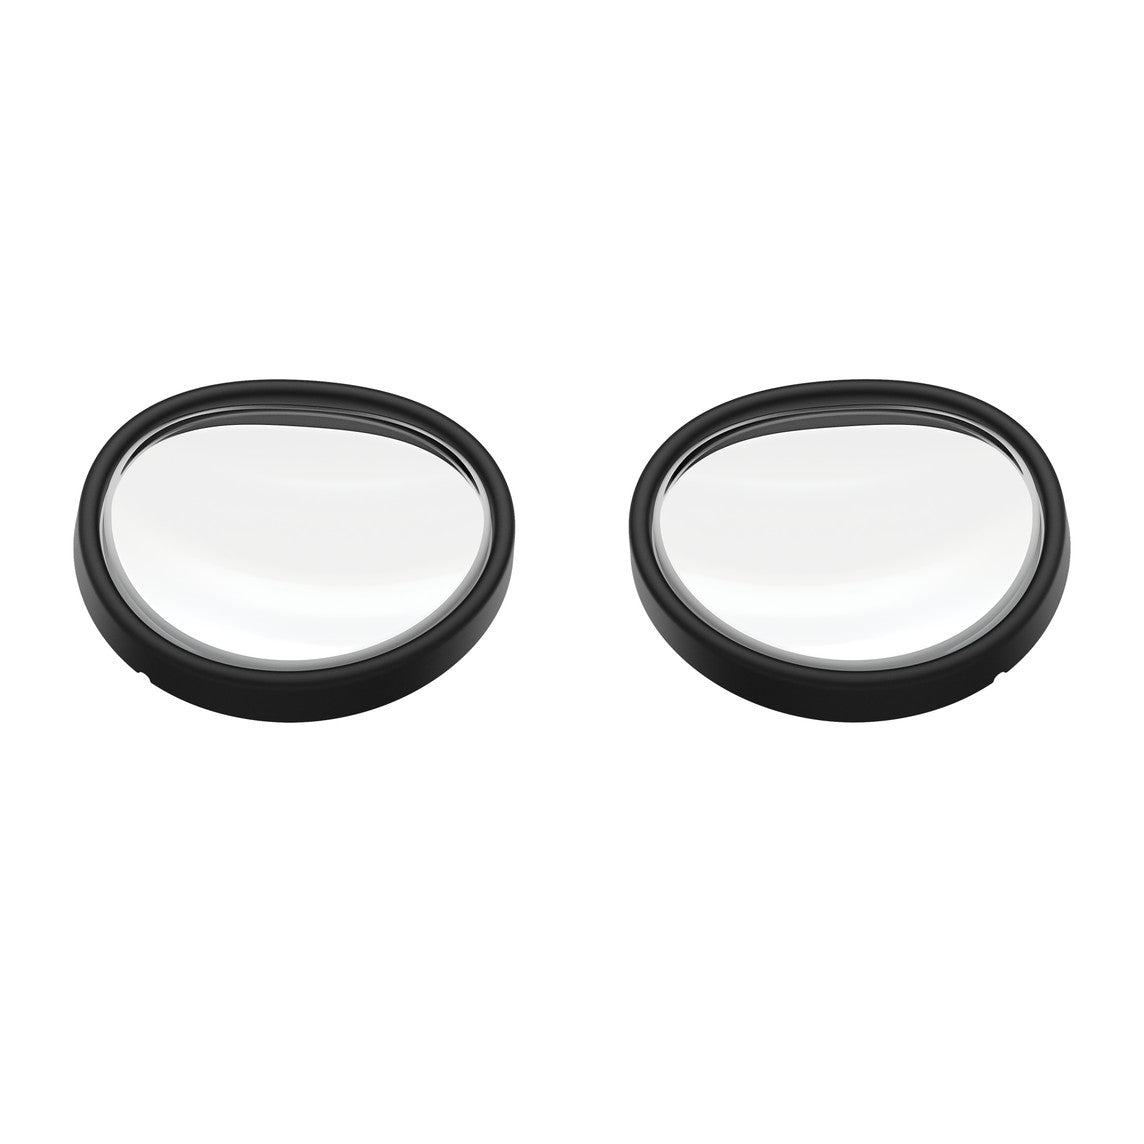 ZEISS Optical Inserts for Apple Vision Pro